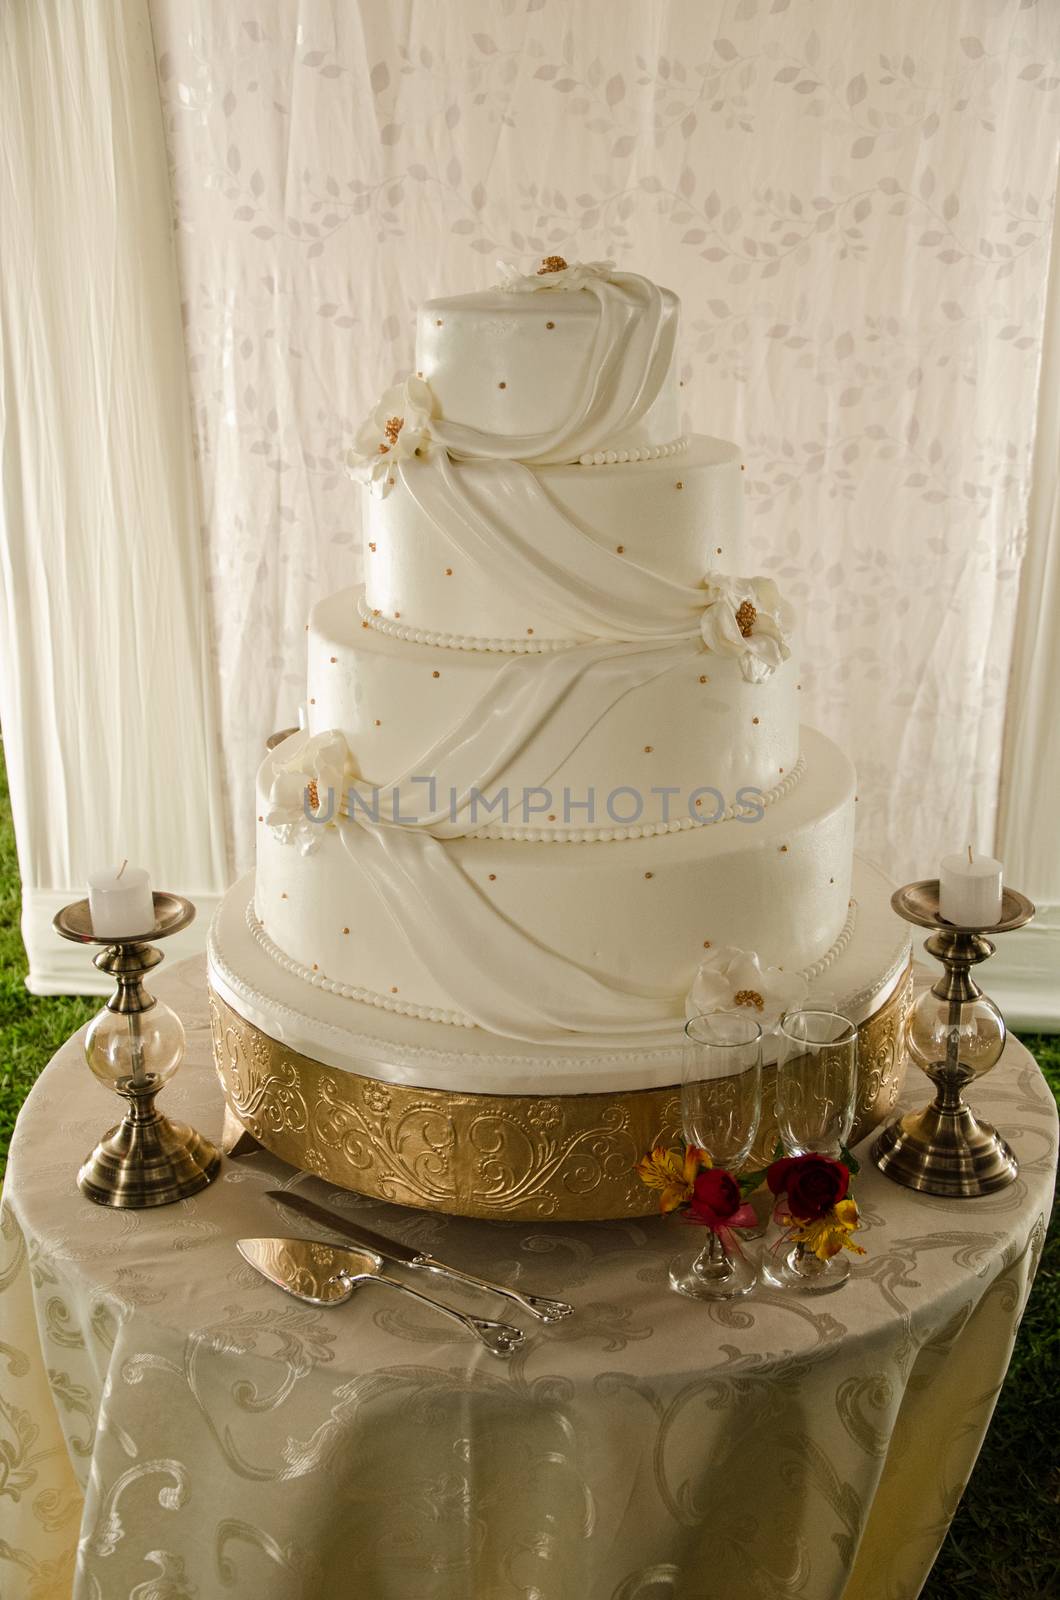 A white wedding cake with candles